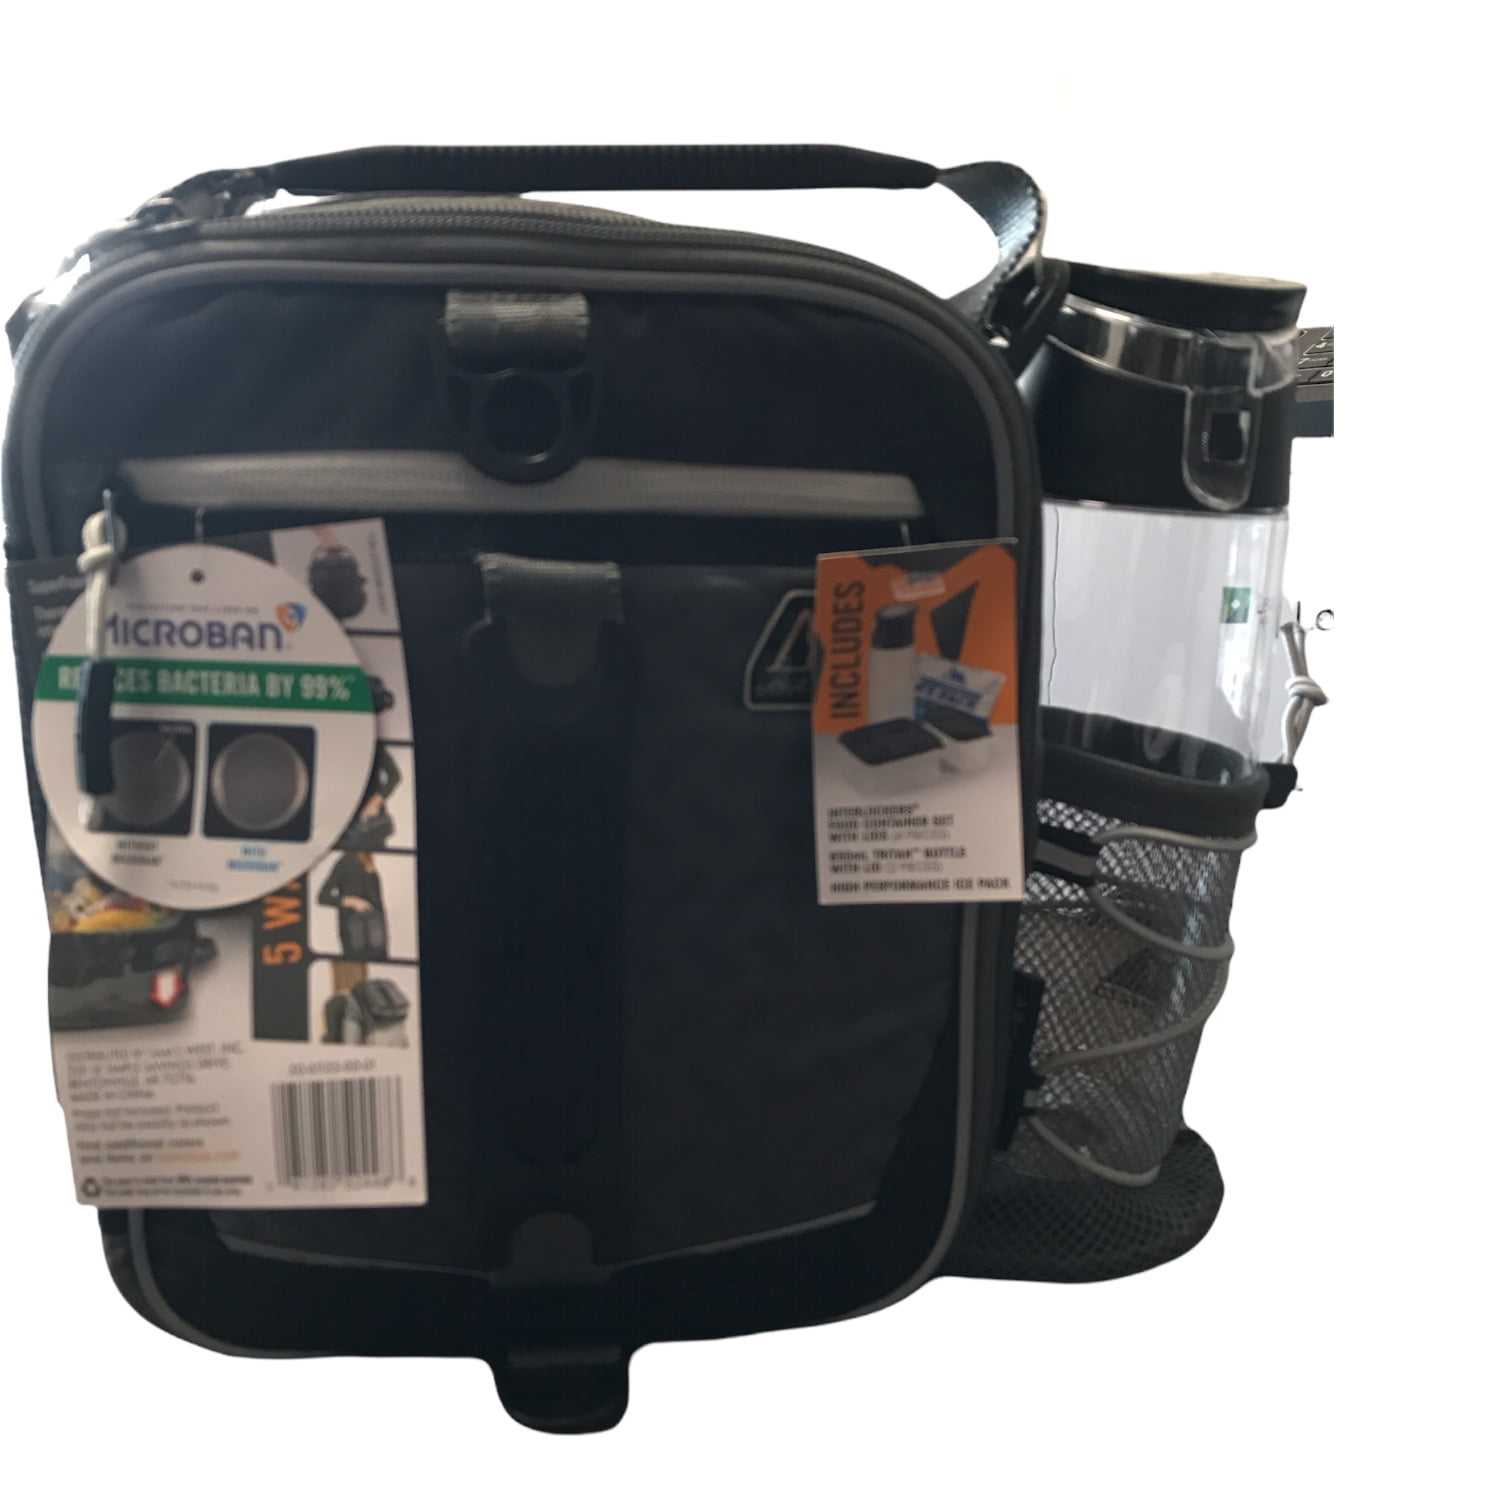 Arctic Zone Pro Expandable Lunch Pack